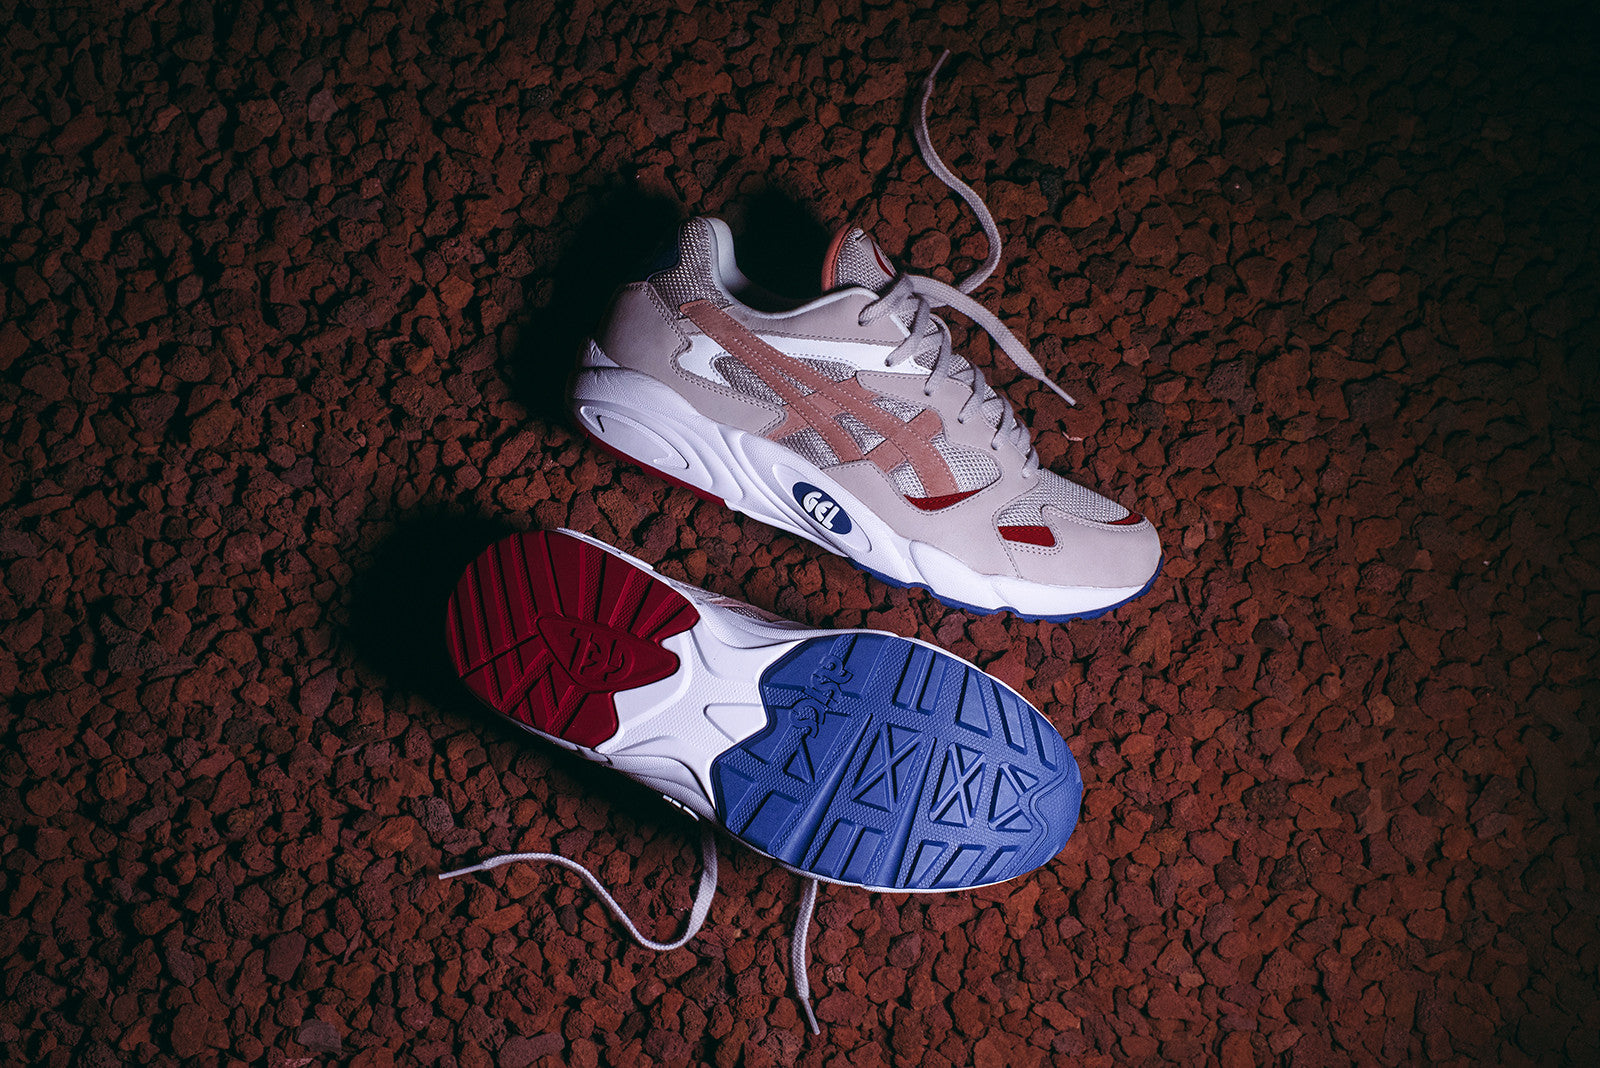 Ronnie x Asics Volcano 2.0 Collection –